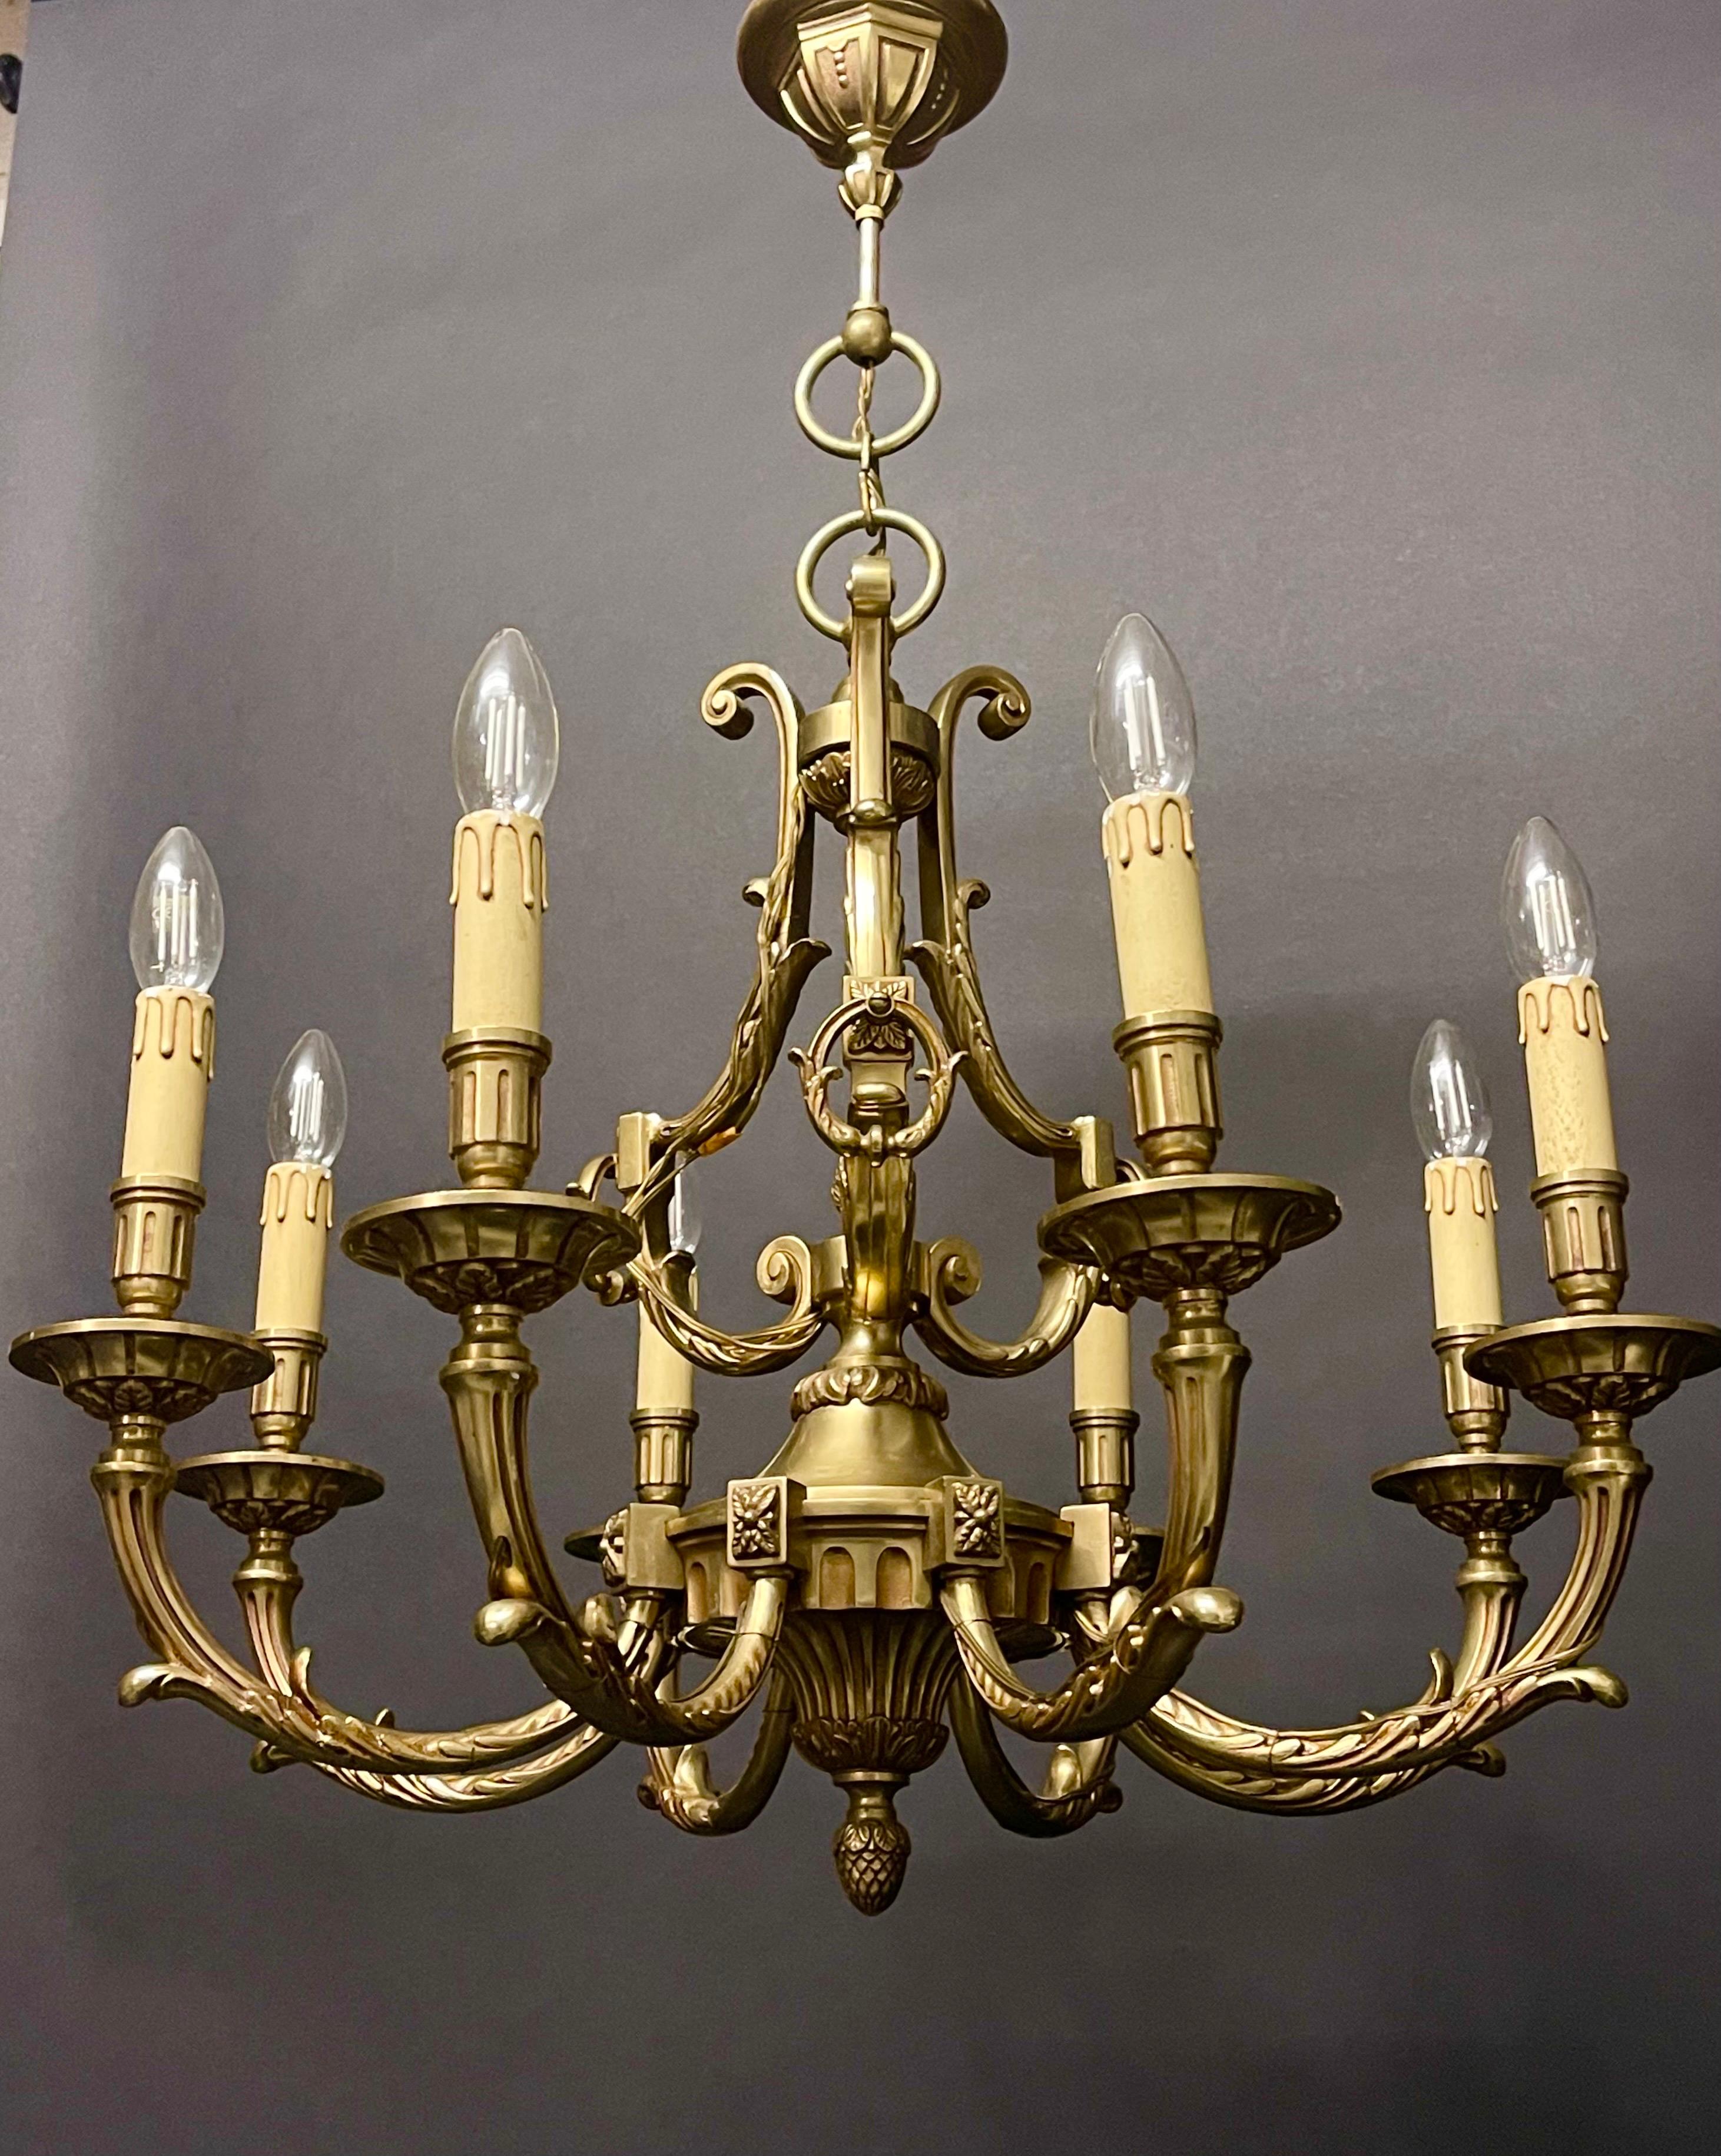 A beautiful solid bronze chandelier attr. to (Maison Lucien Gau), Paris, France.
The chandelier has eight scroll arms and displays great elegance, thanks to a platinum coating old gold. This chandelier is inspired by the mid-18th century and in the